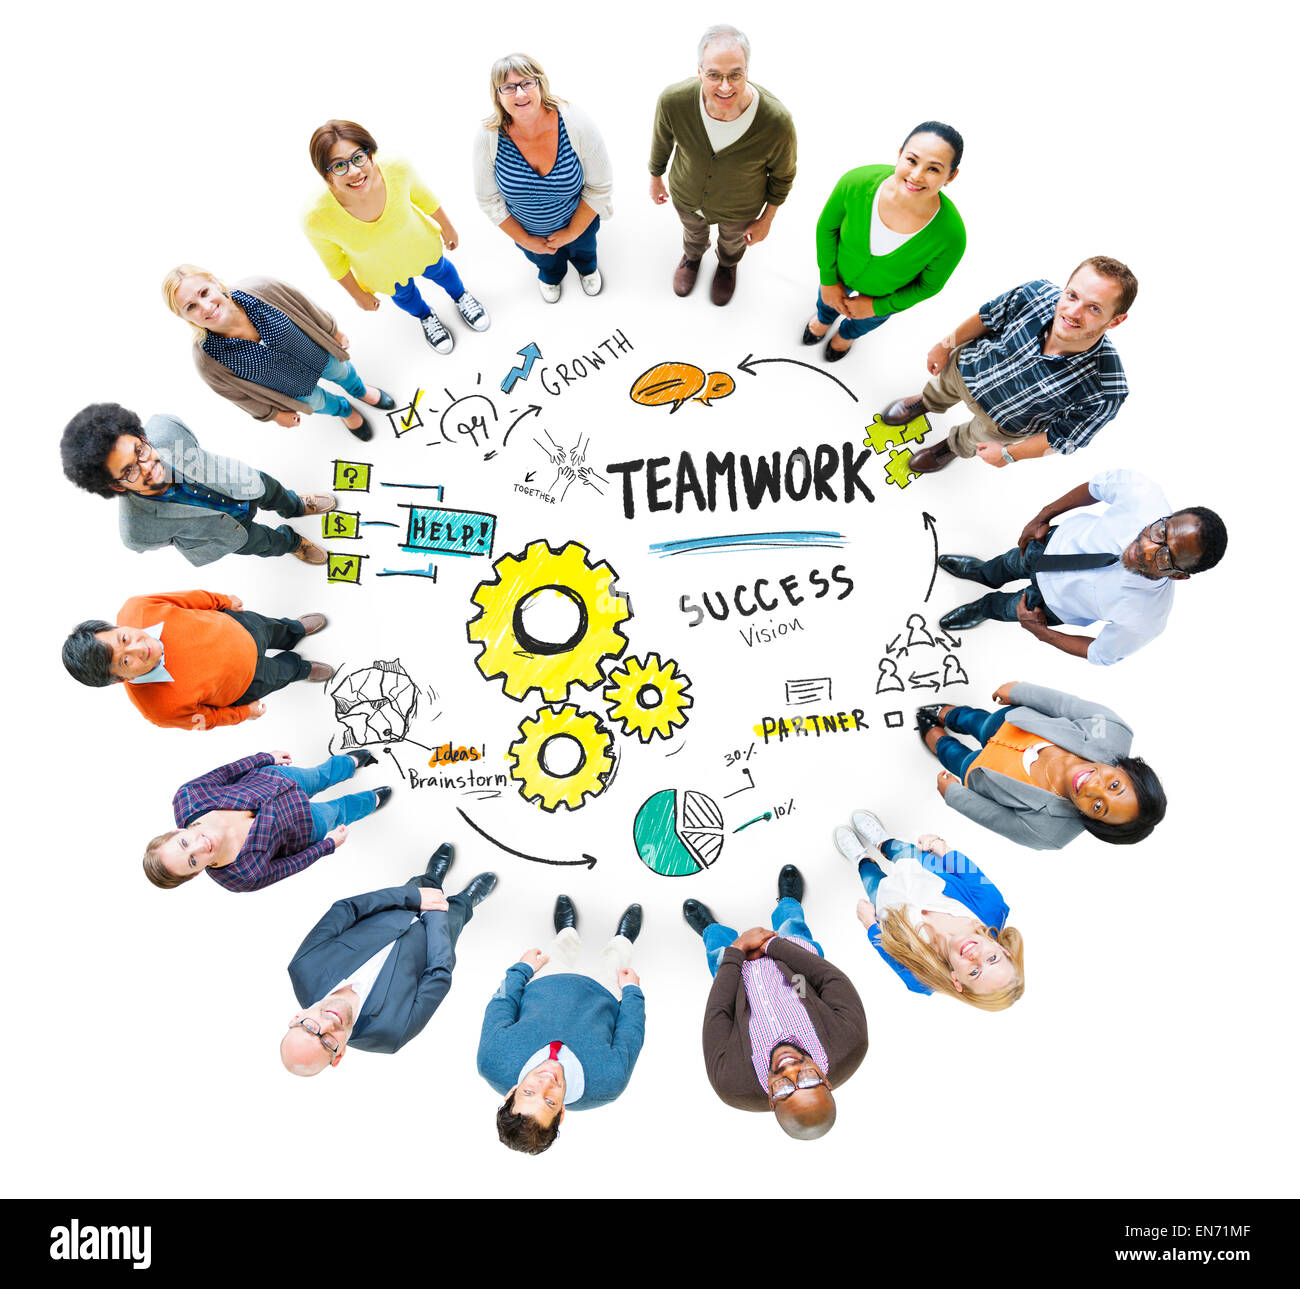 Teamwork Team Together Collaboration Meeting Looking Up Concept Stock Photo